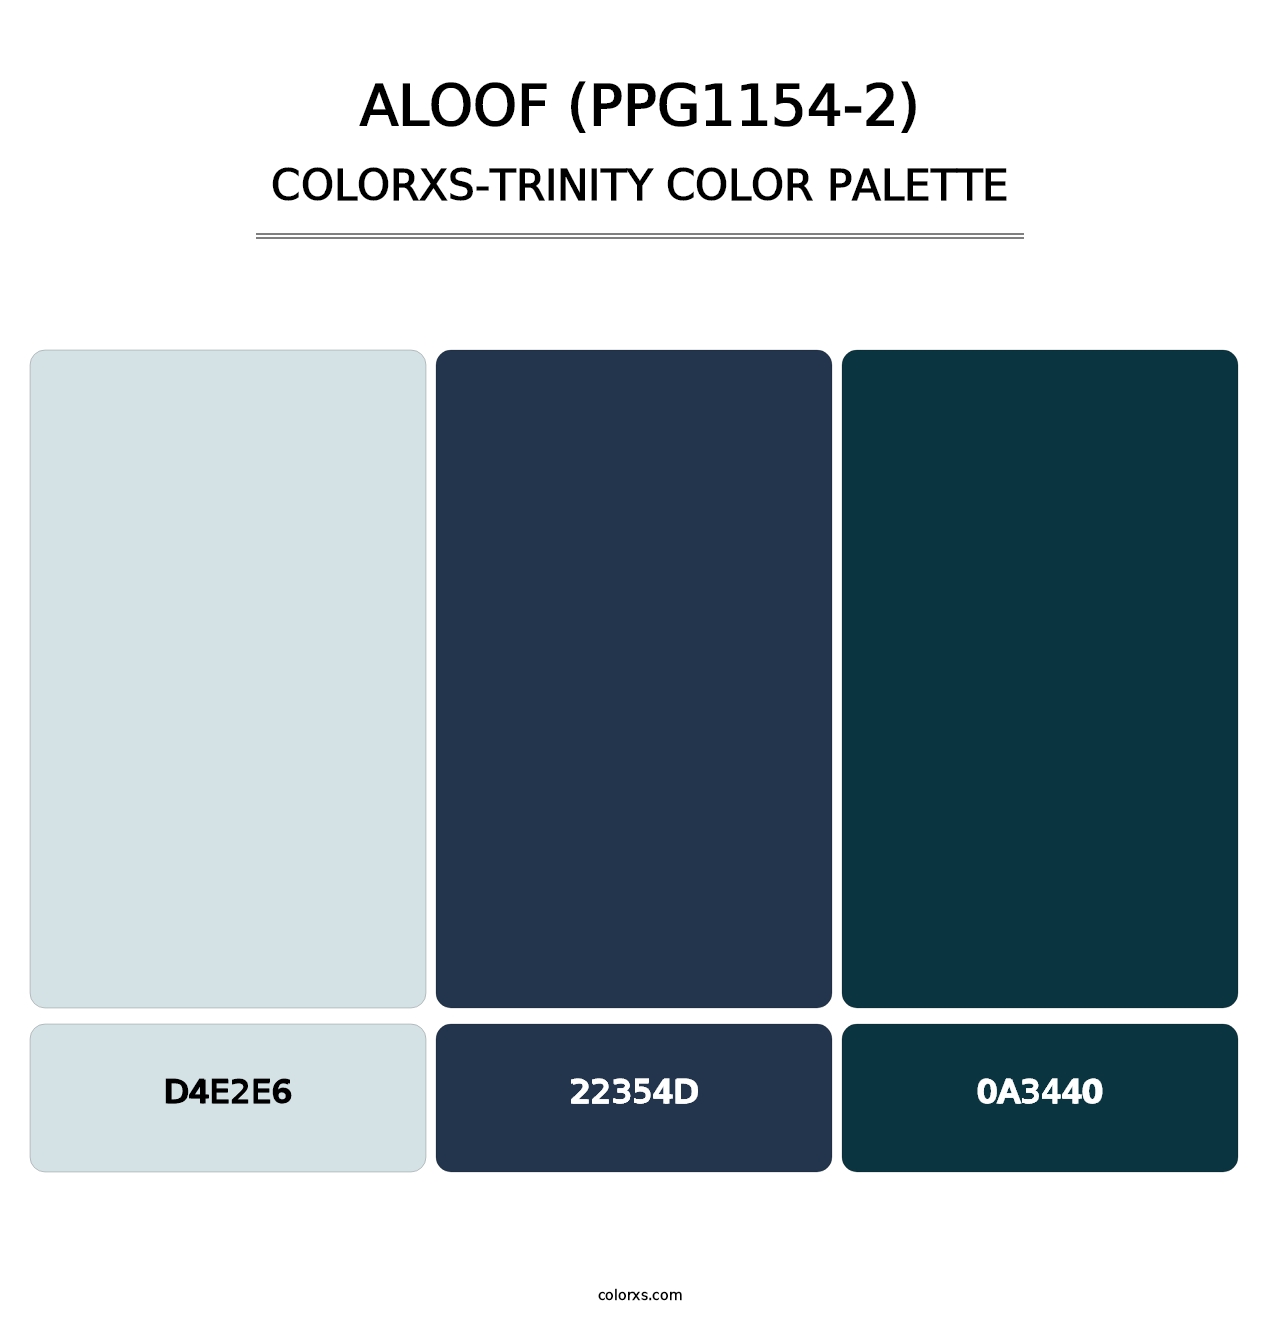 Aloof (PPG1154-2) - Colorxs Trinity Palette